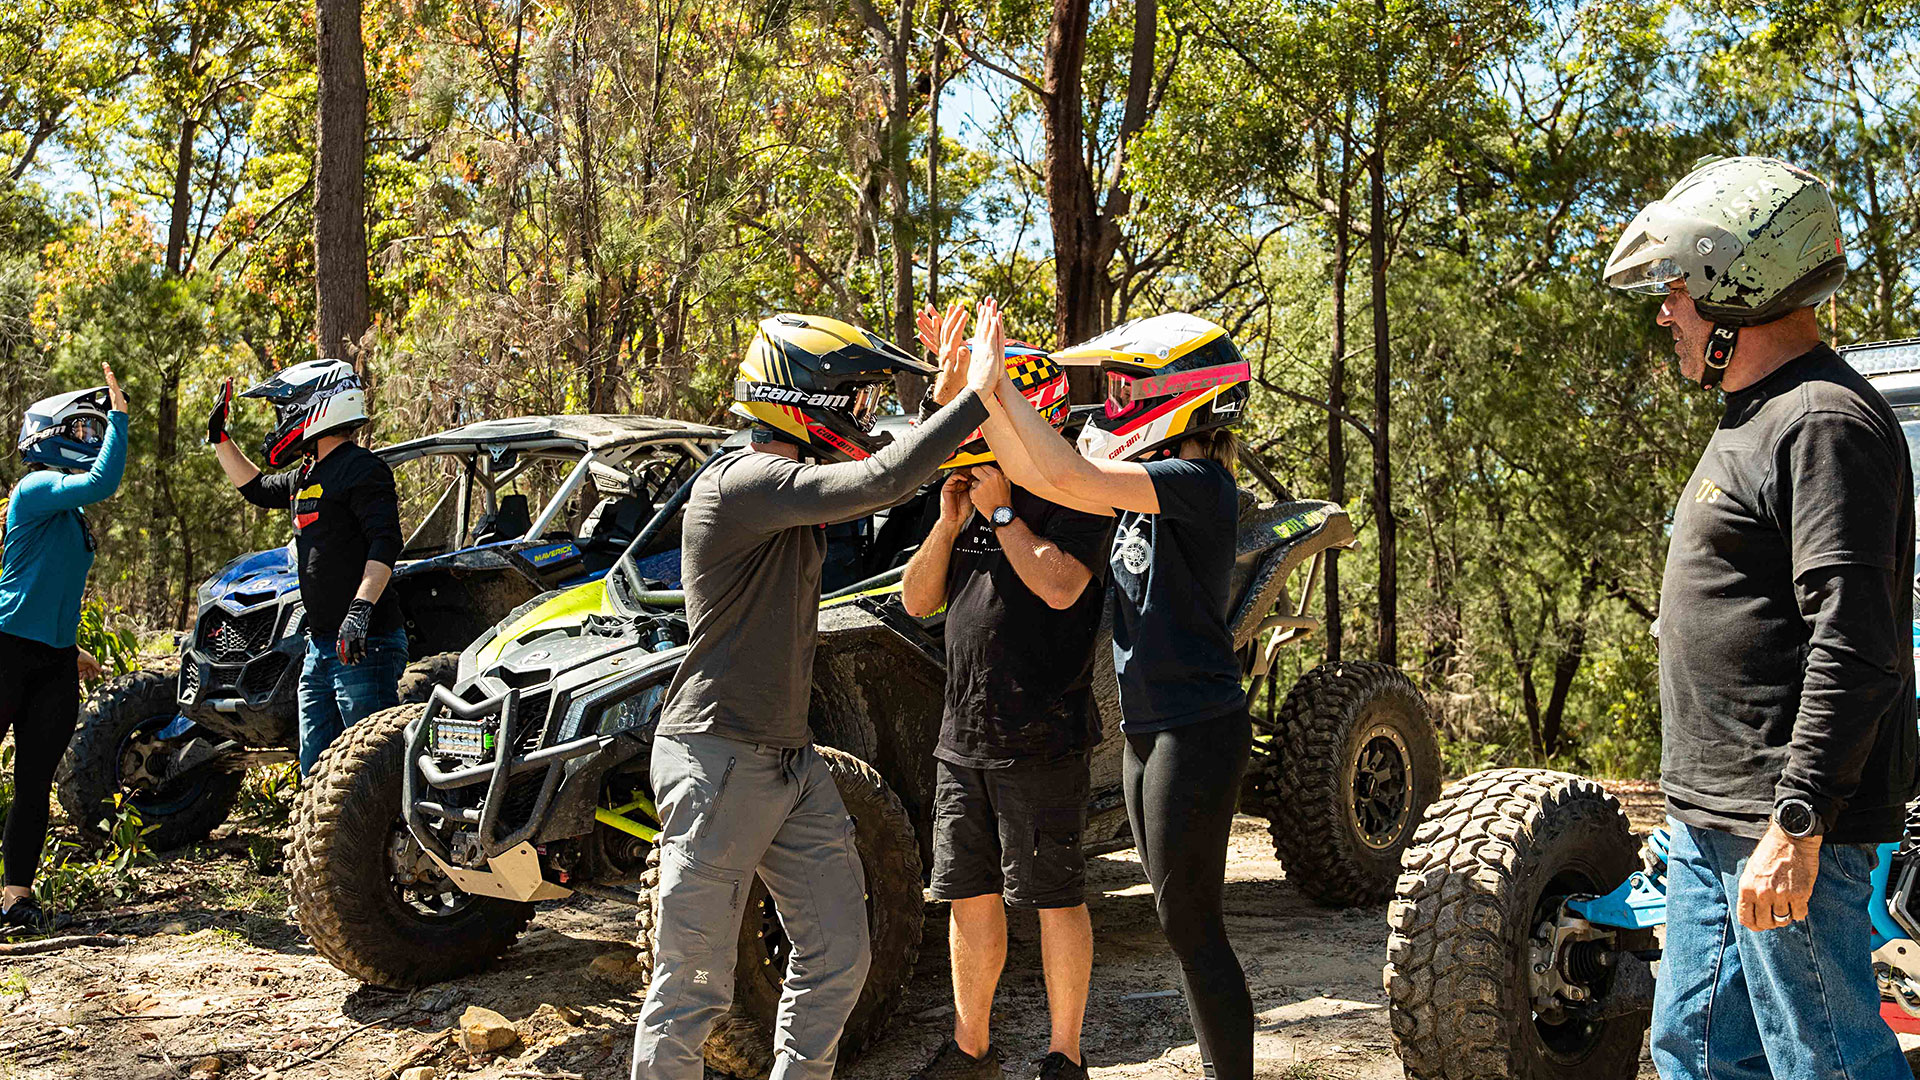 Riders high-fiving near Can-Am vehicles